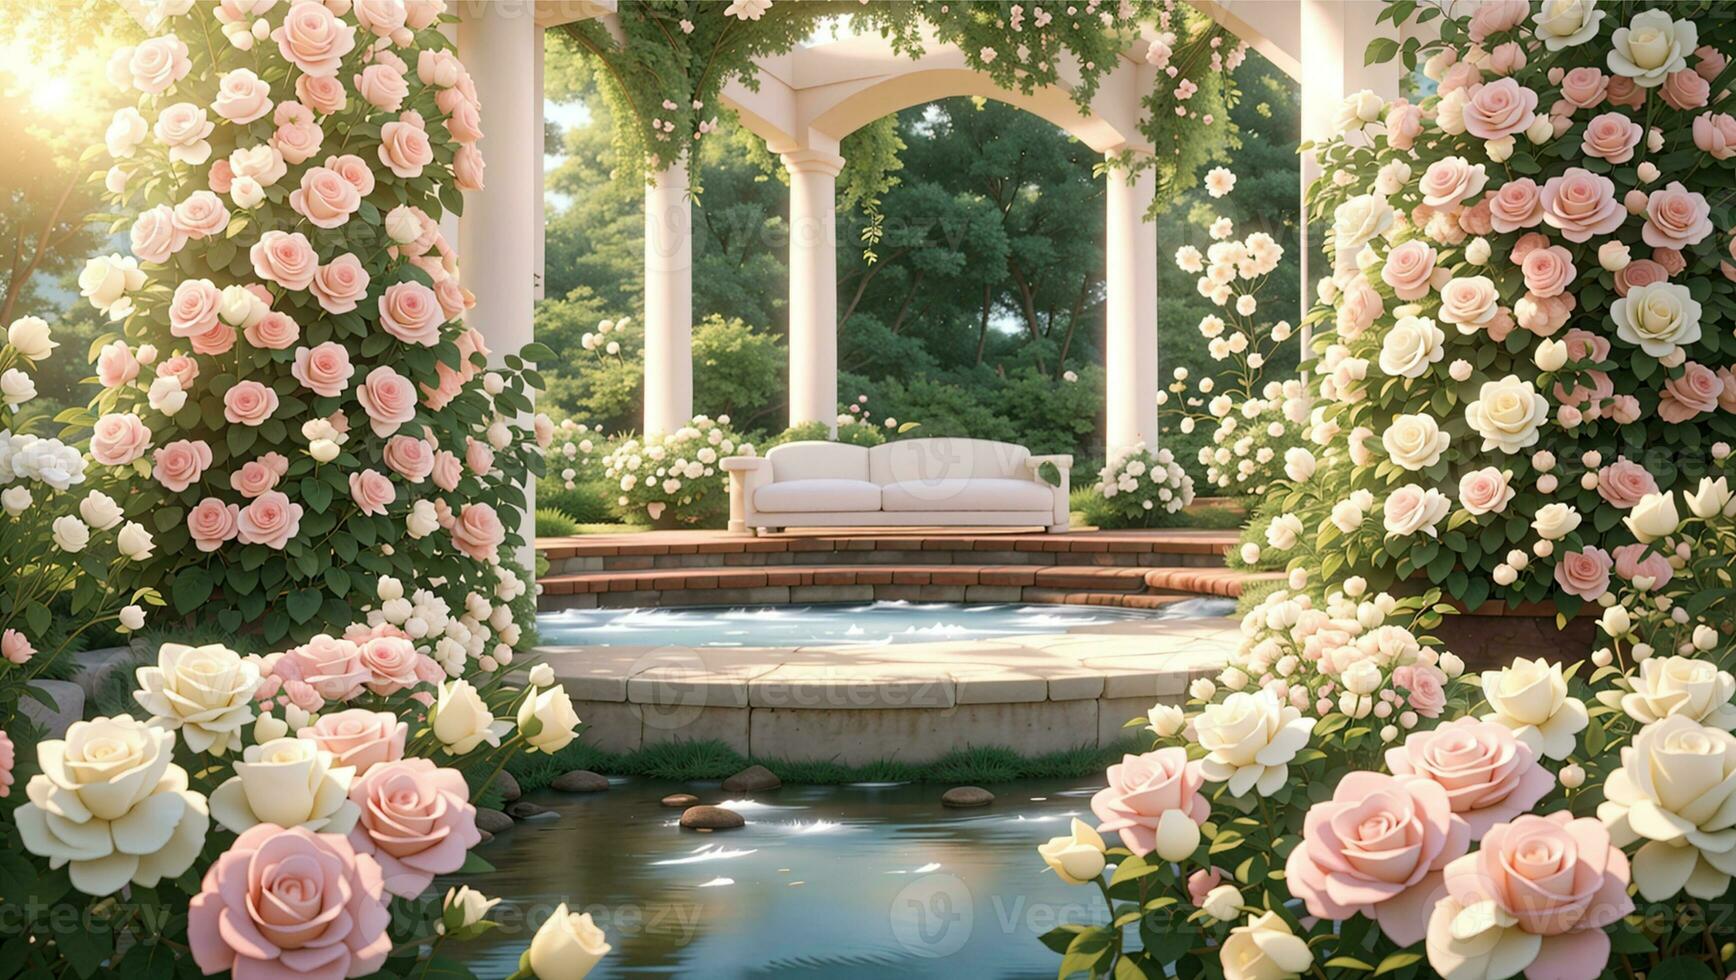 Romantic Rose Garden with Gazebo and Pond Background photo